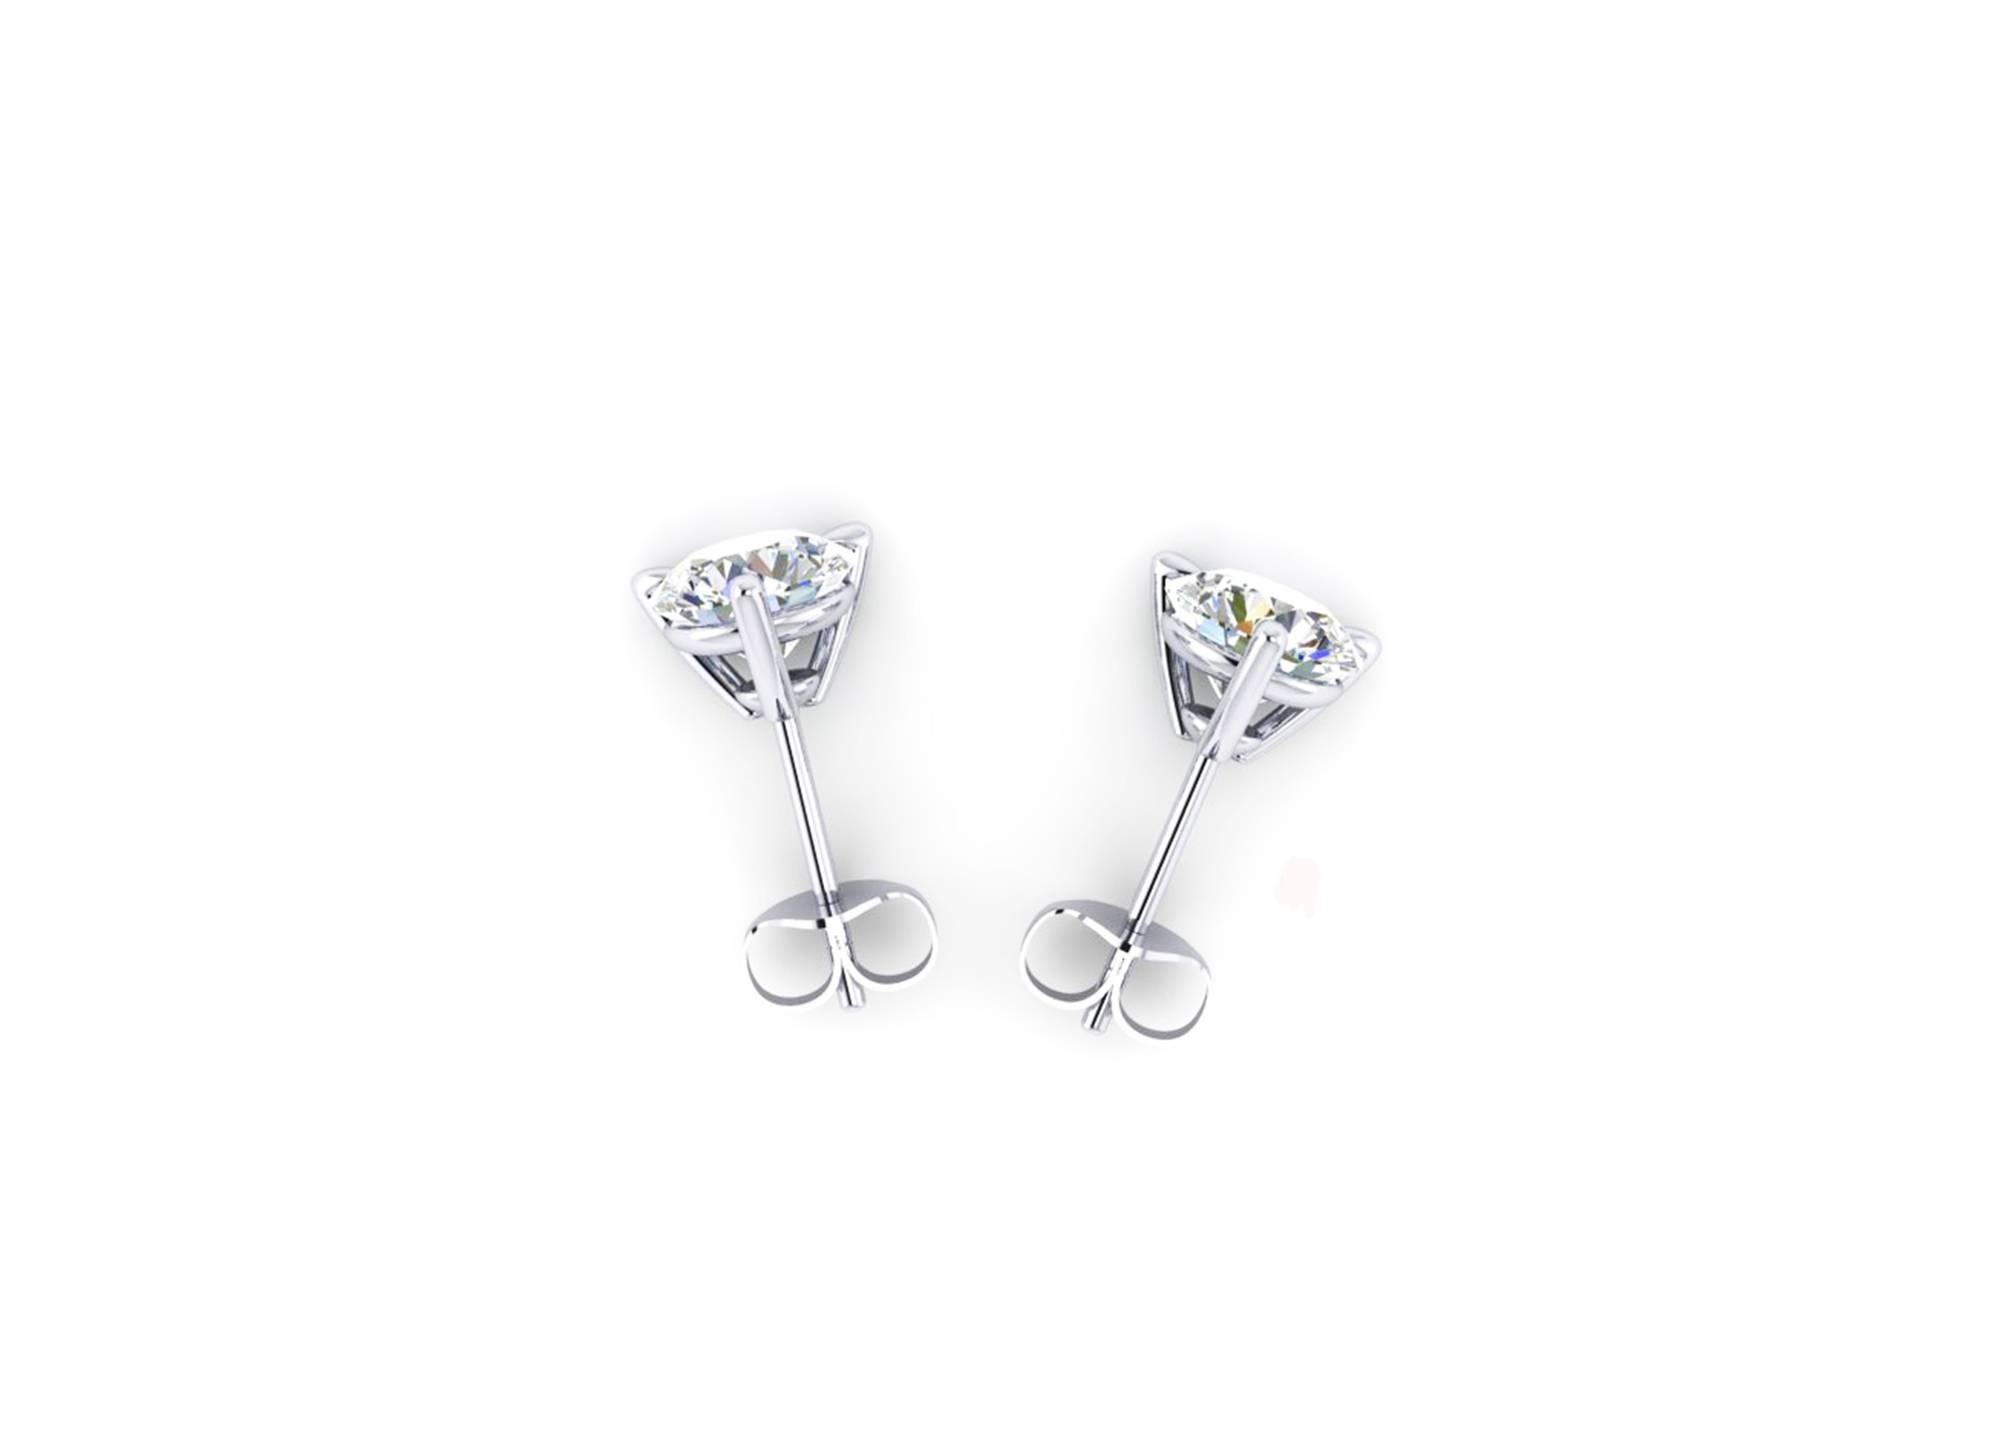 Modern Ferrucci GIA Certified 1.92 Carat D Color, If Internally Flawless Martini Studs